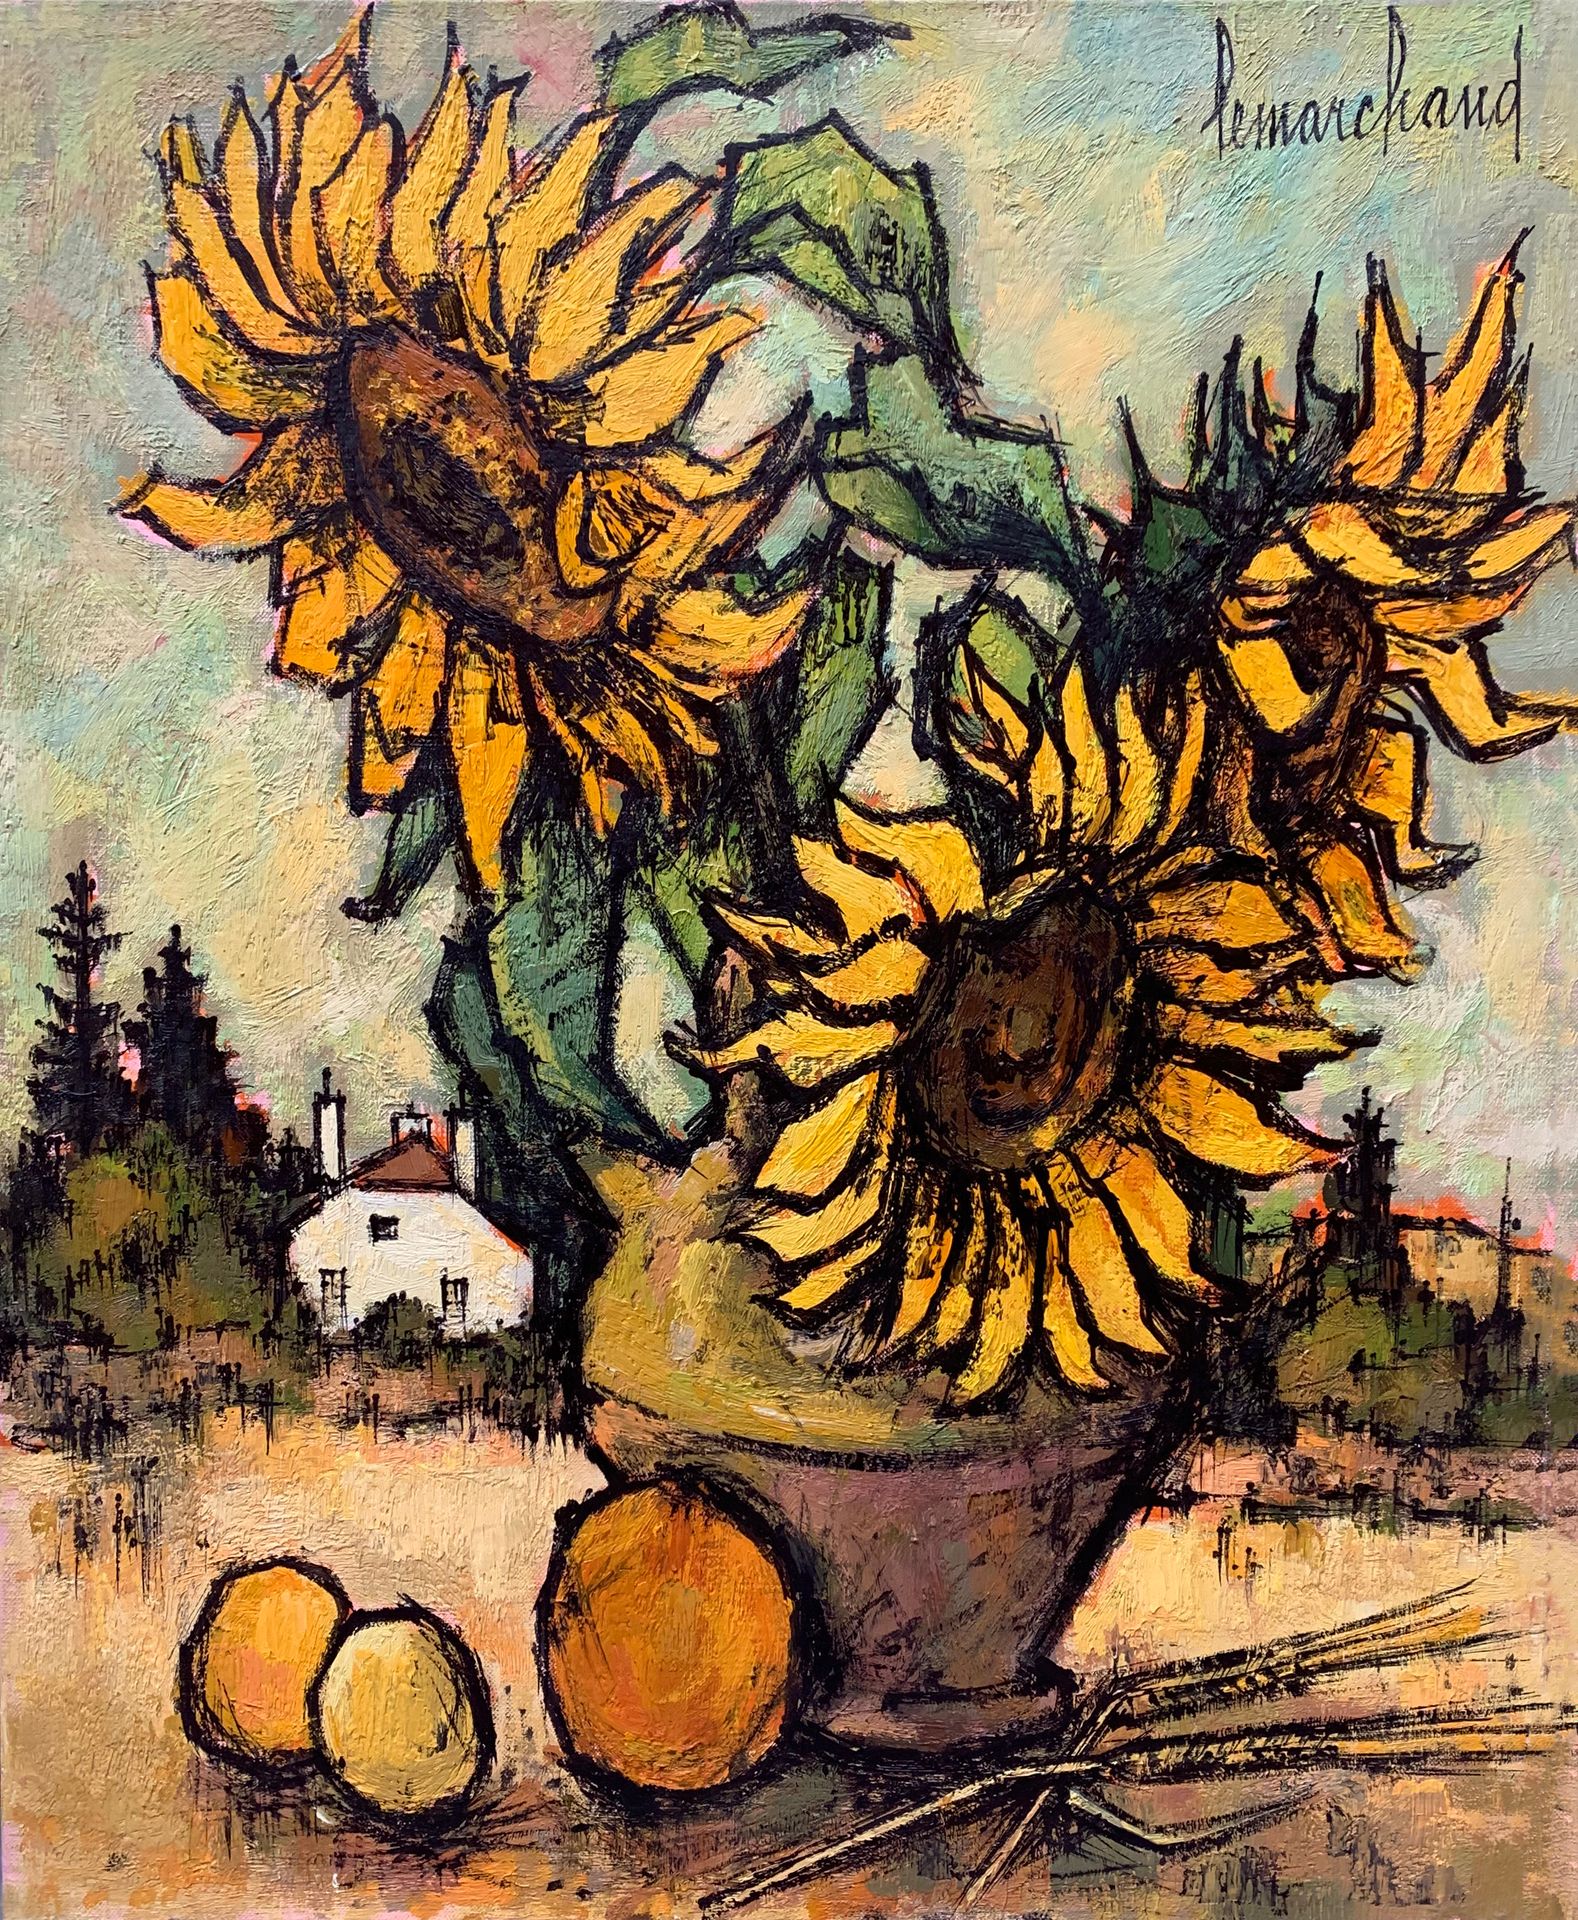 Null Pierre LEMARCHAND (1906-1970)

The bunch of sunflowers

Oil on canvas signe&hellip;